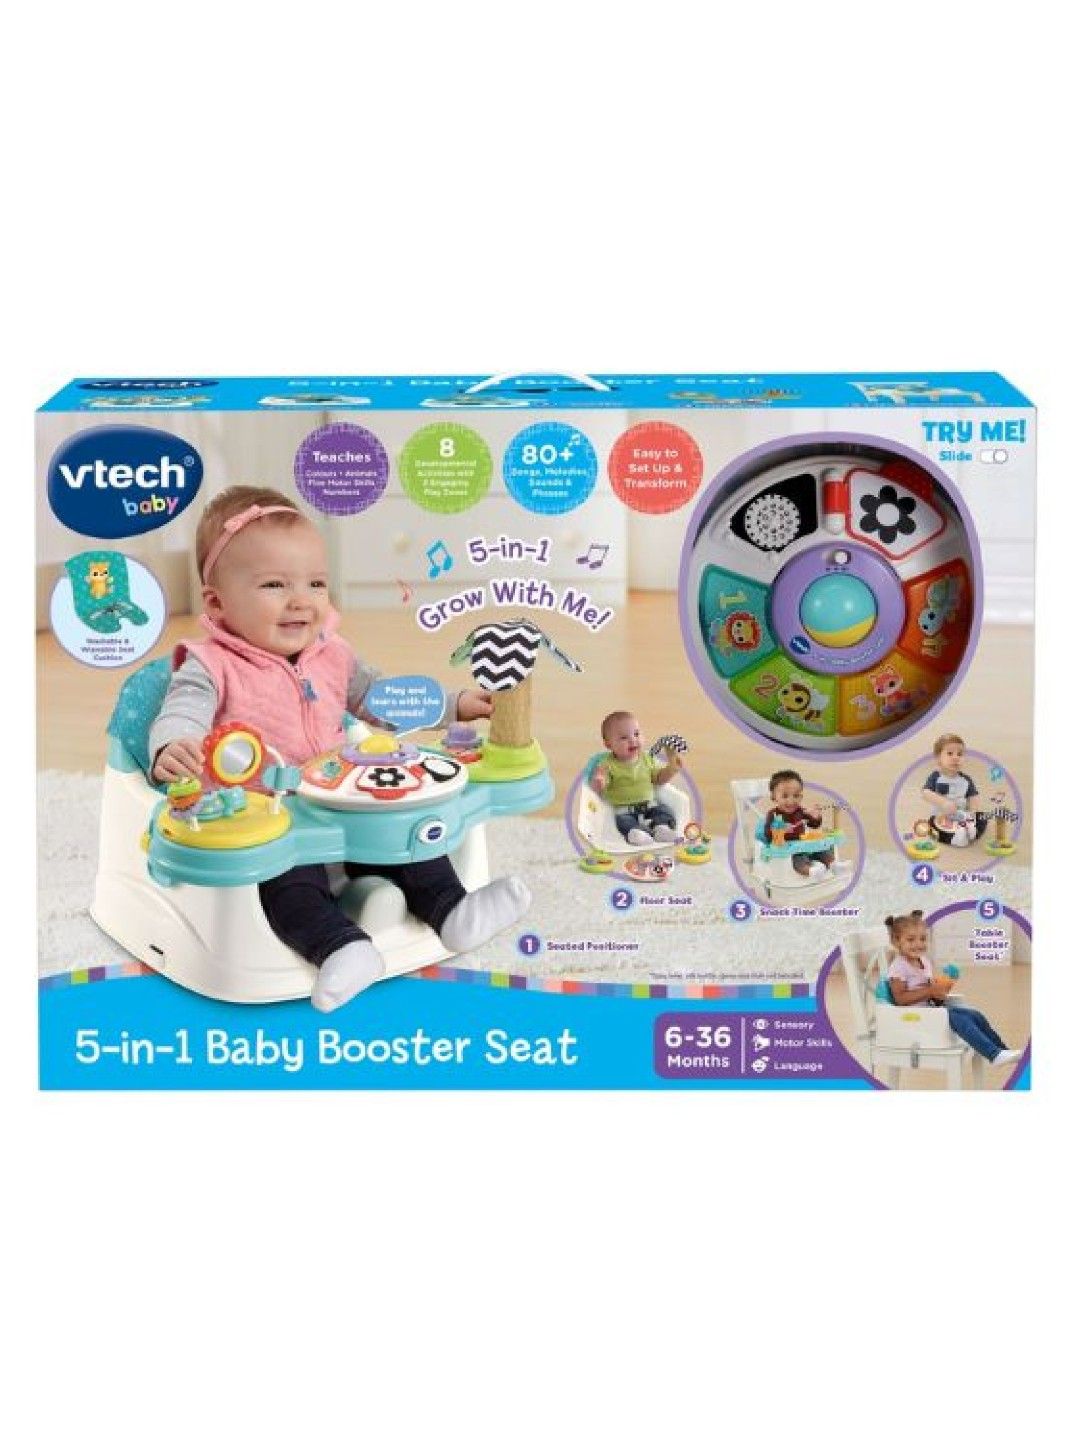 VTech 5 in 1 Baby Booster Seat (Multicolor- Image 3)